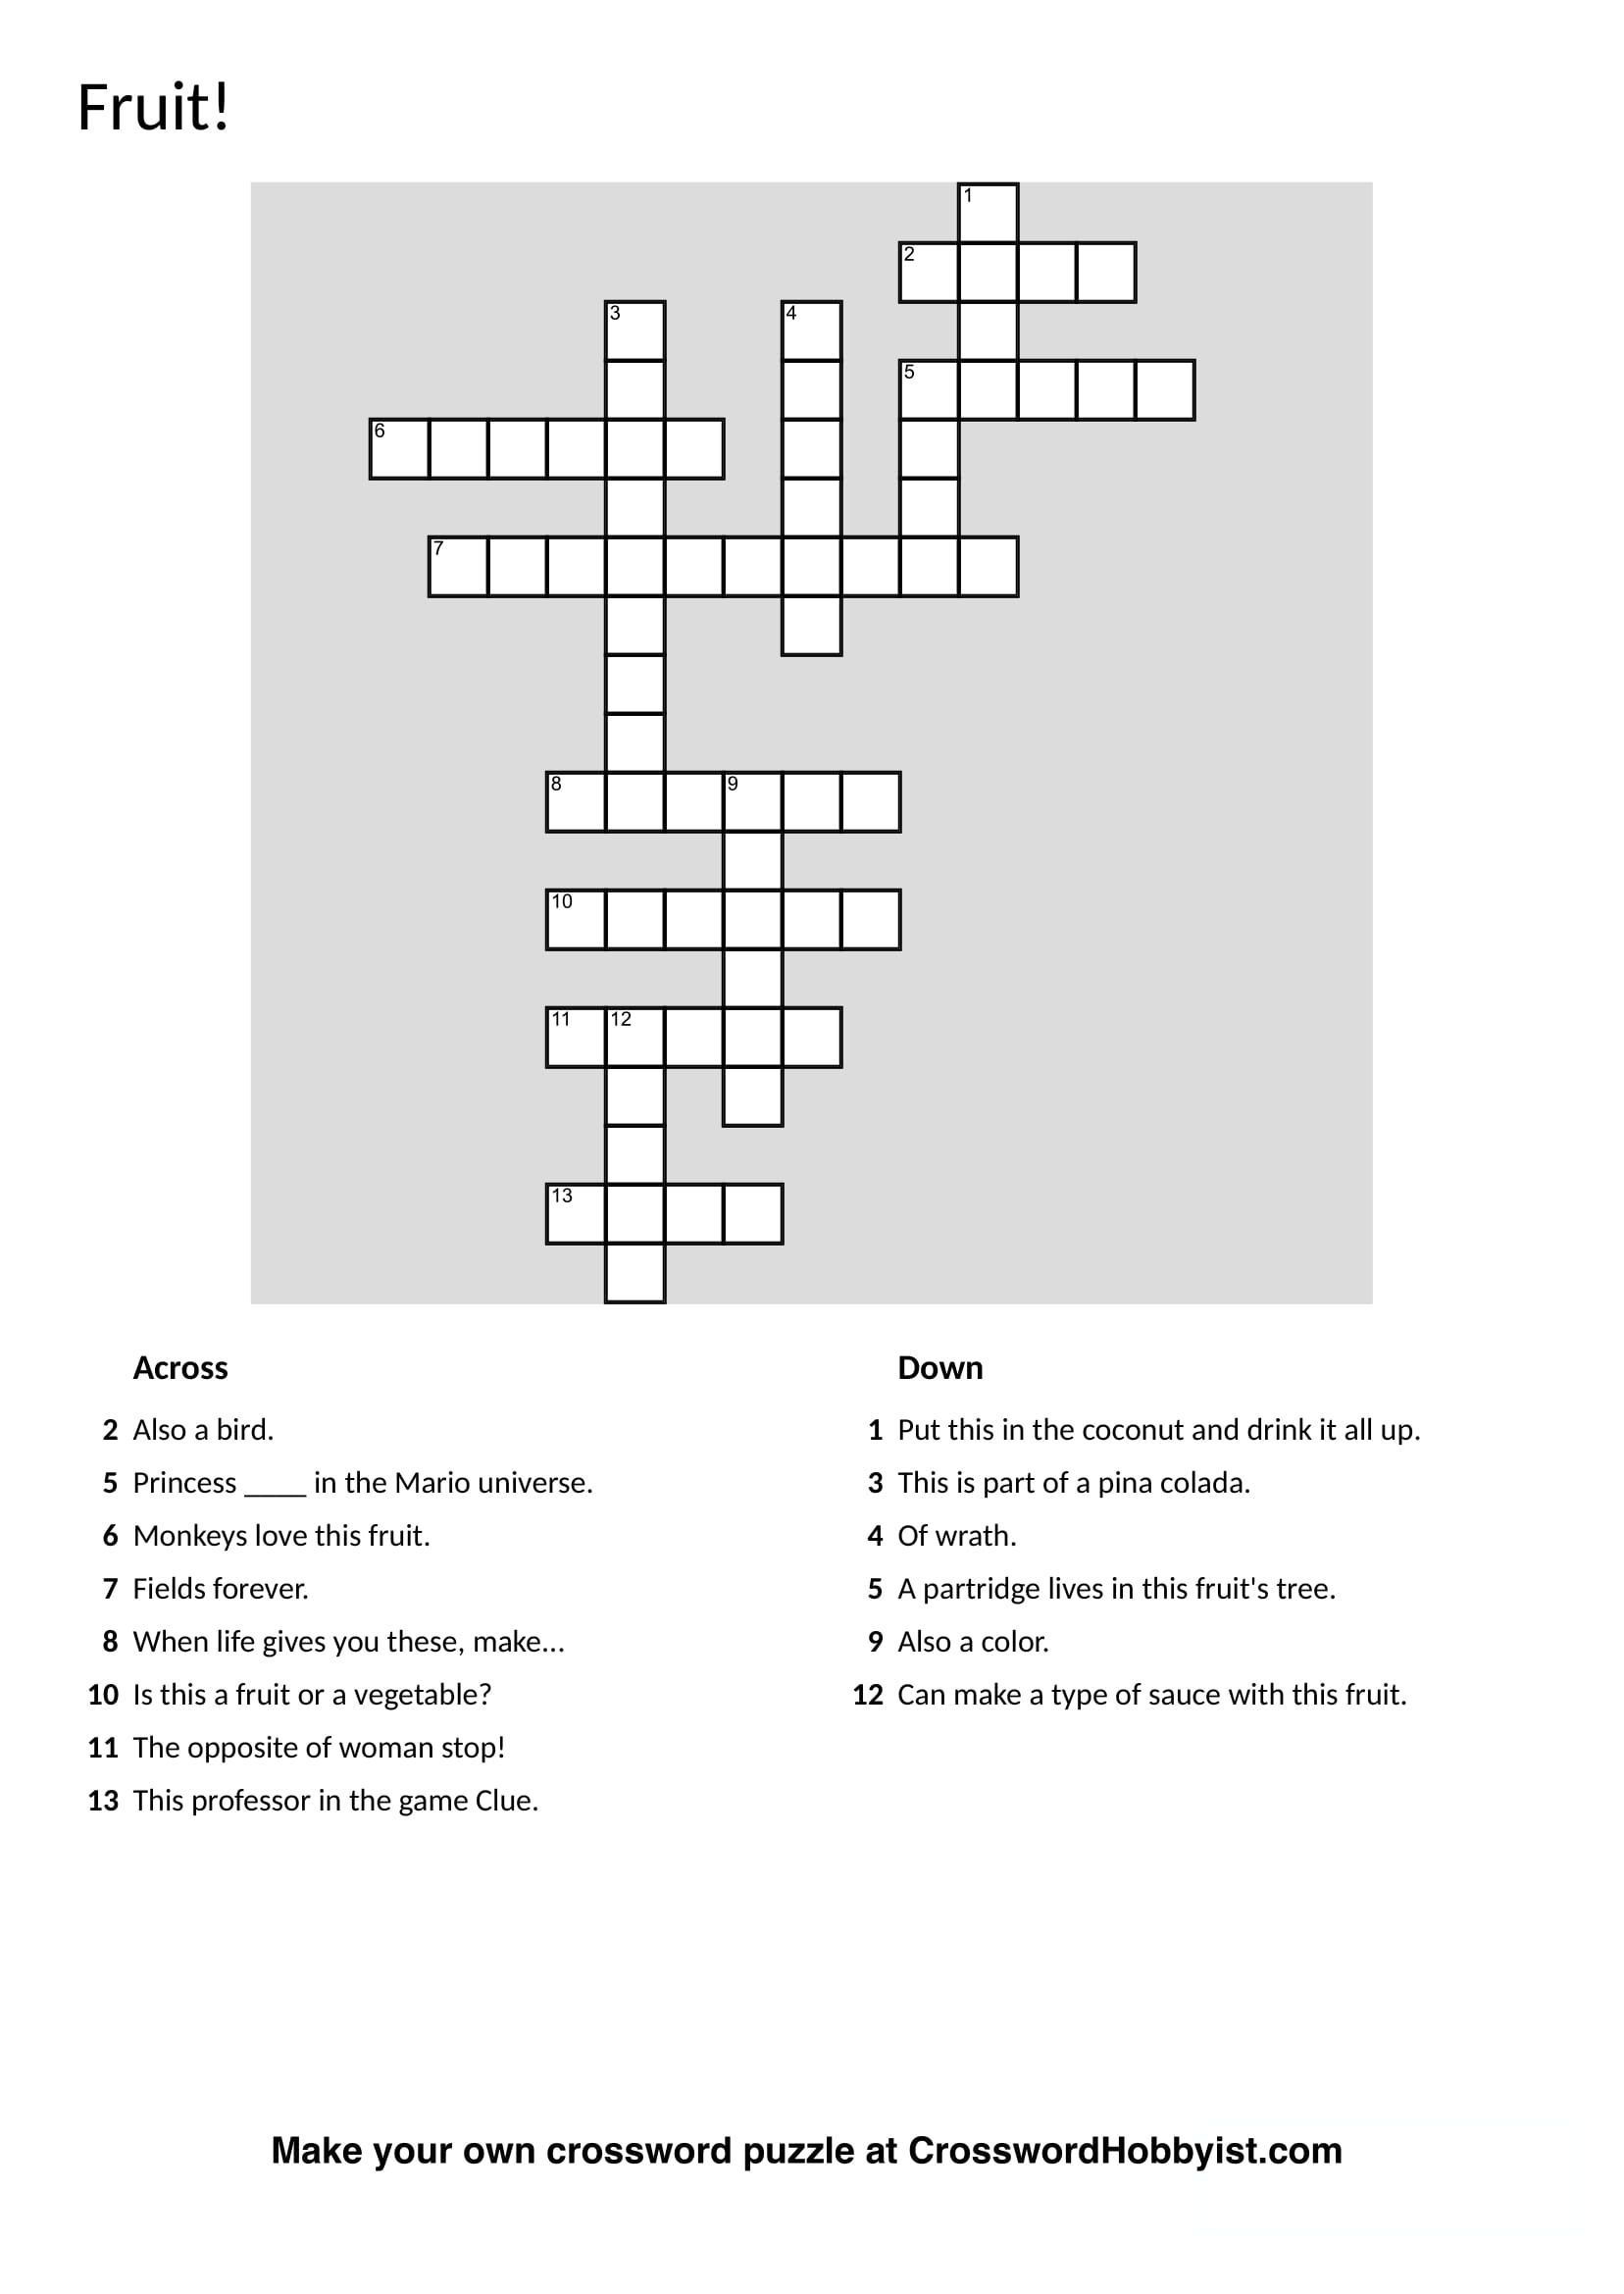 Make Your Own Fun Crossword Puzzles With Crosswordhobbyist - Create Own Crossword Puzzles Printable